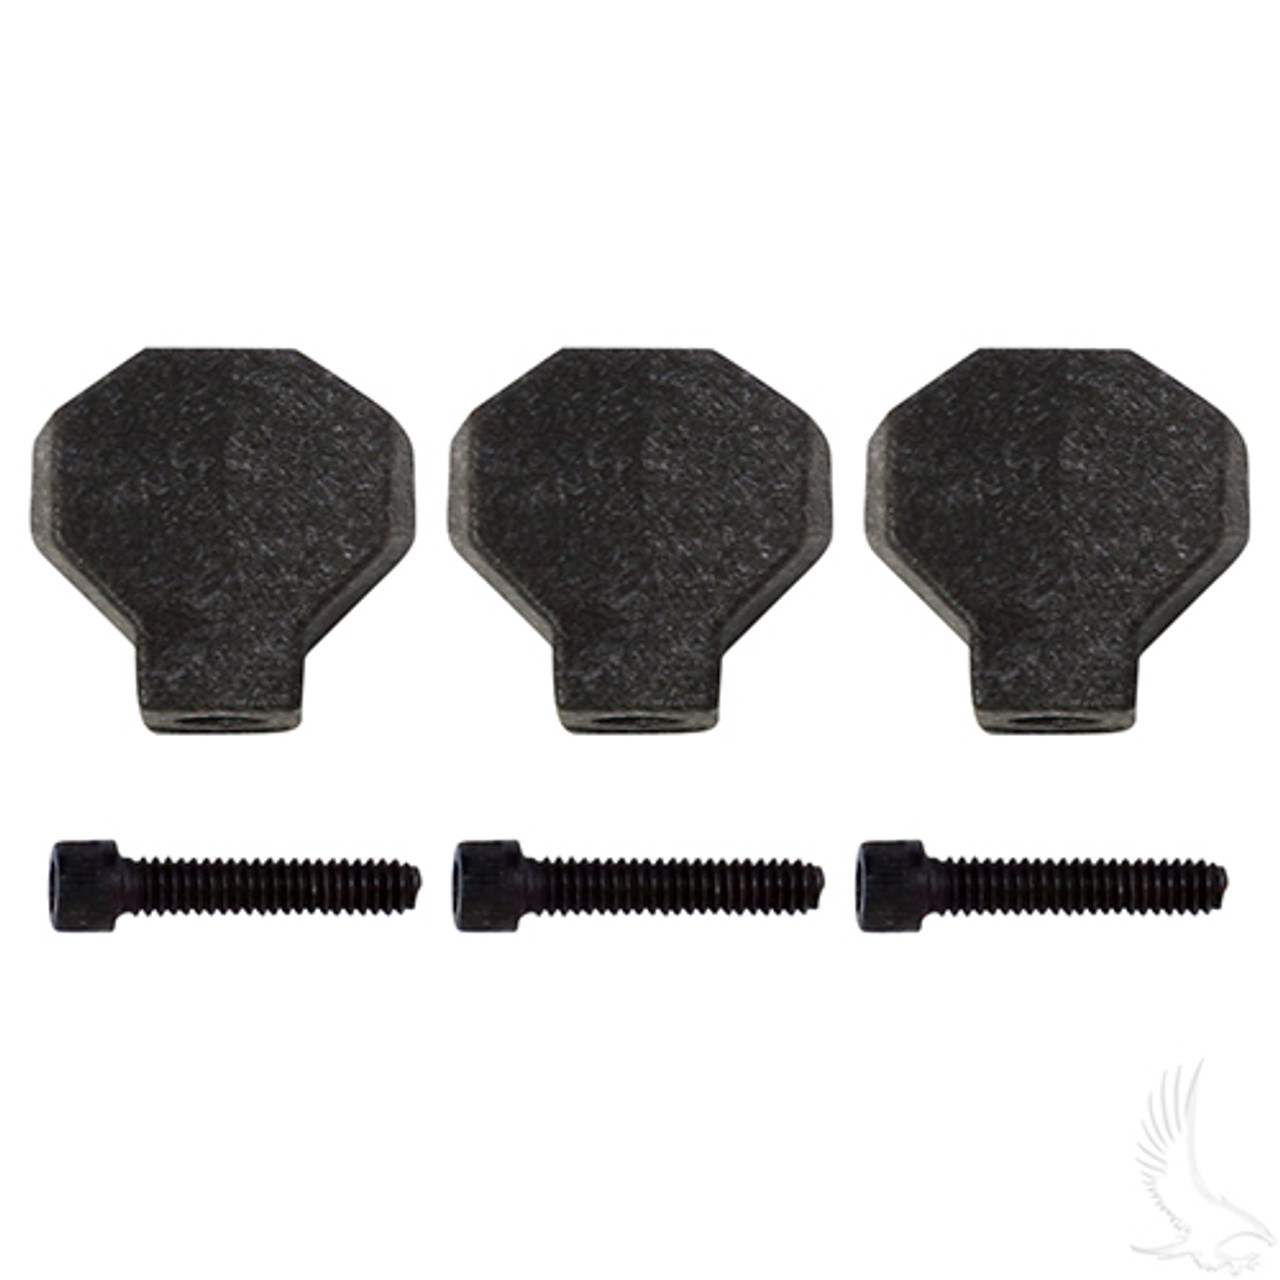 EZGO Gas Golf Cart Secondary Clutch Ramp Shoe Kit (1989-1994) (PACK of 3), CP-0027